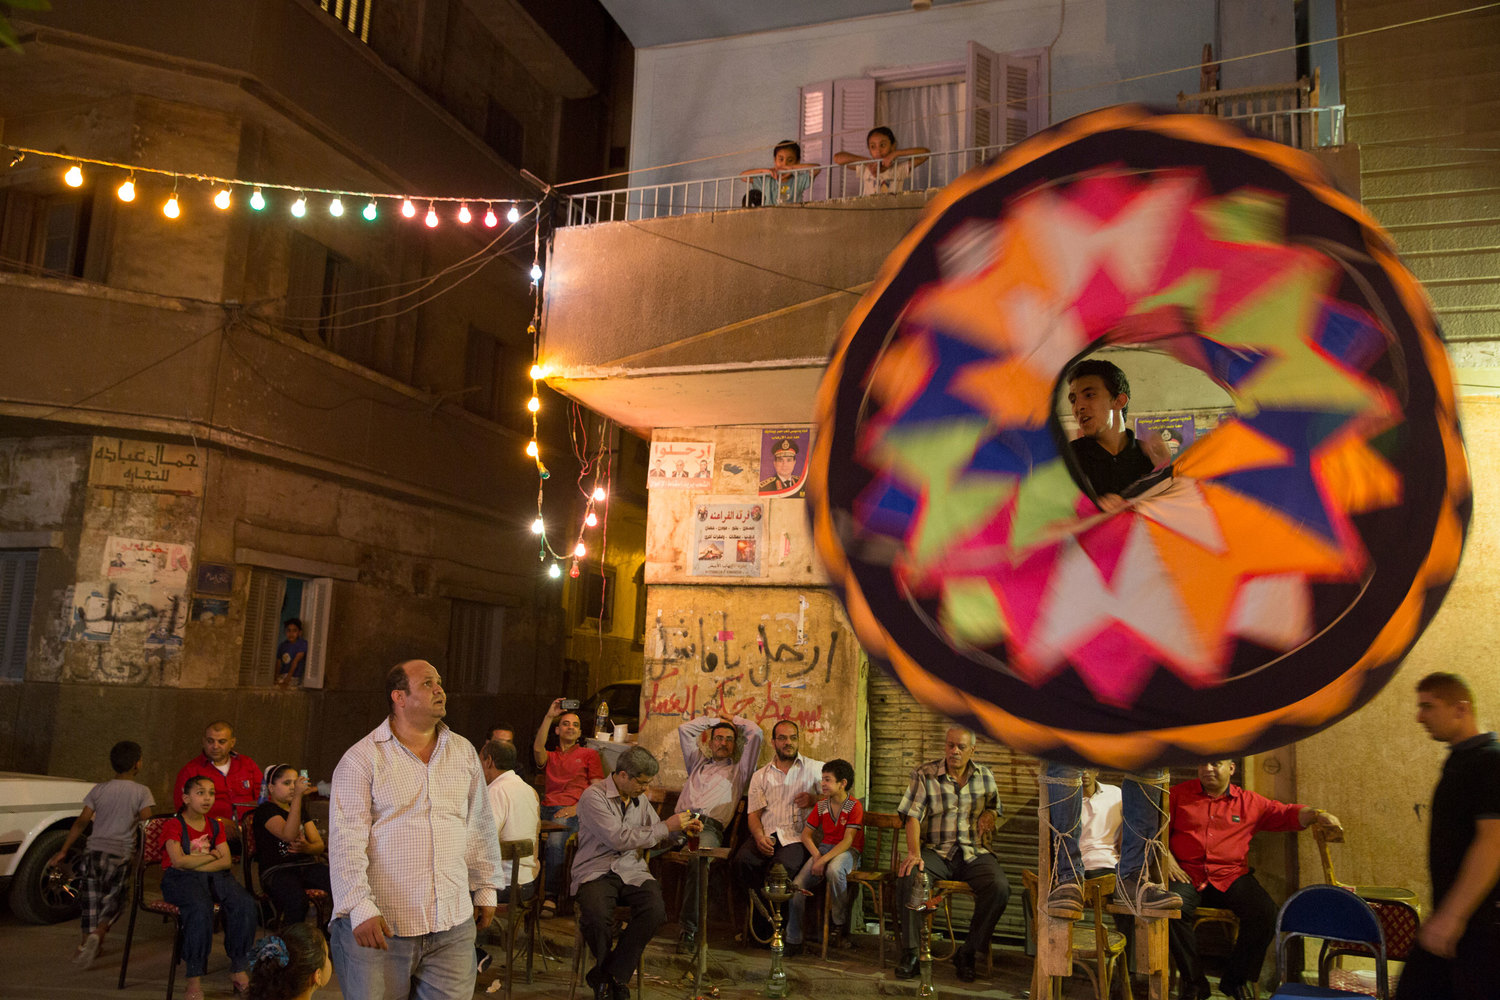  A group of local men from Sayeda Zeinab perform their skills at a local party in the side streets of the neighborhood. 